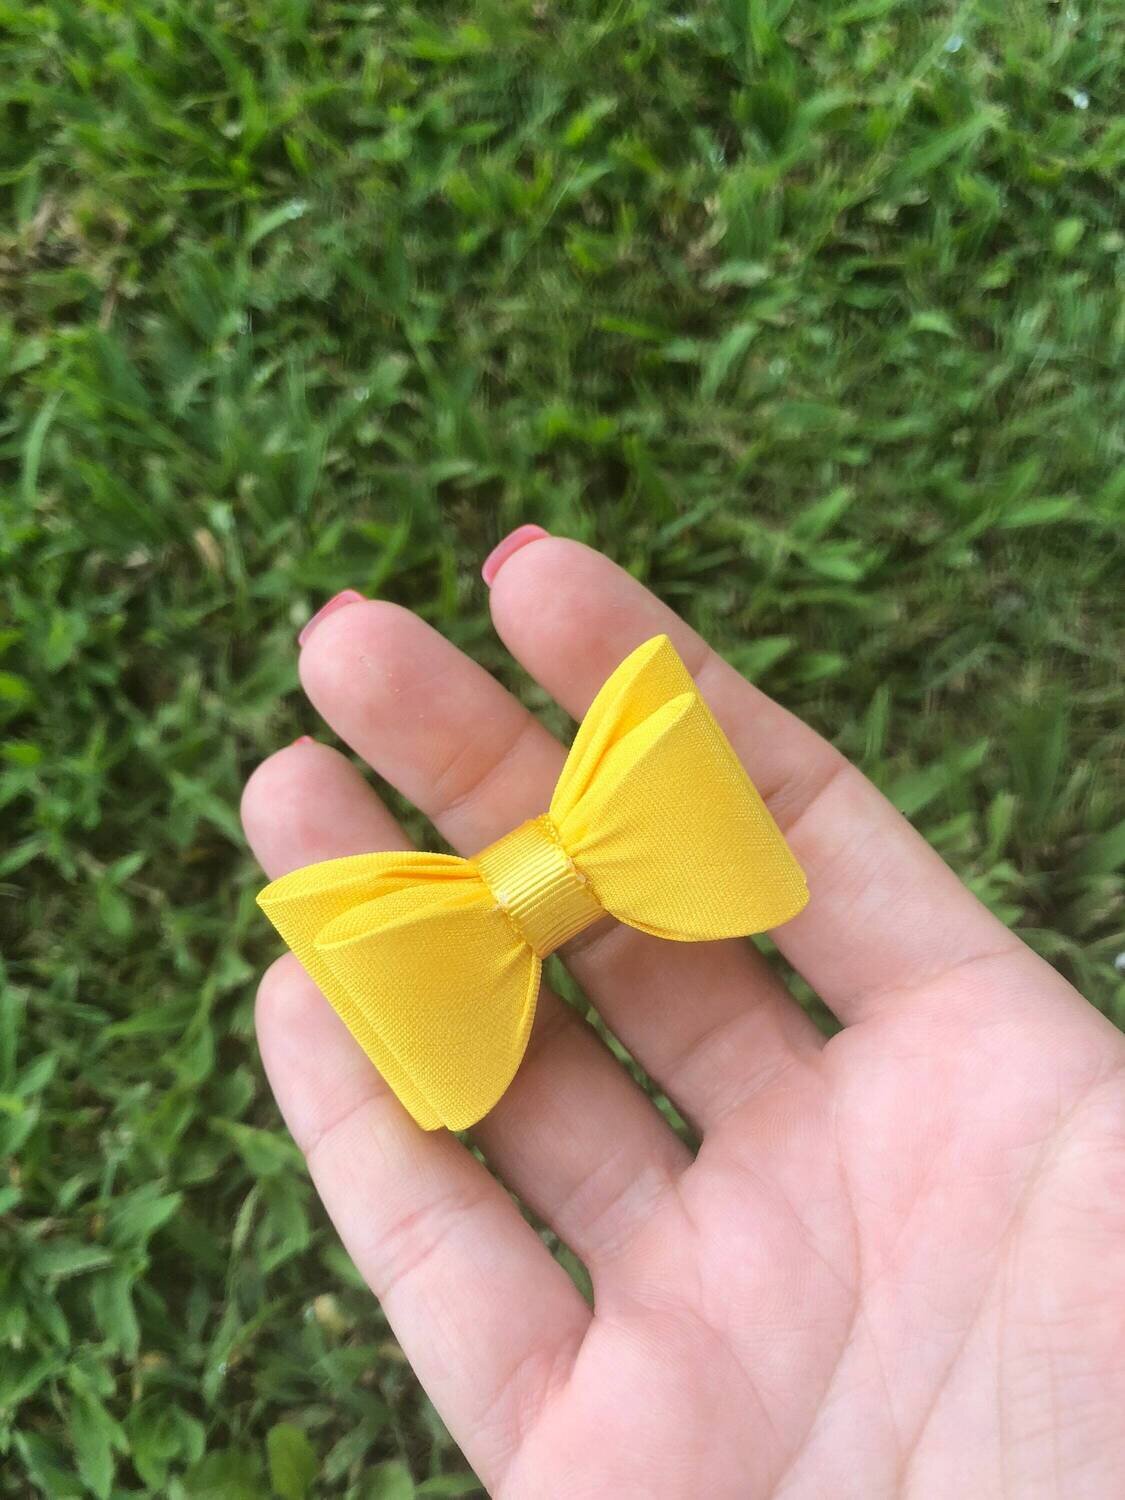 Baby Yllow Bow Newborn Baby Bow Yellow Baby Hair Bow Small Baby Bow Hair Clip Flower Girl Baby Small Hair Bow Yellow Baby Bow 1484